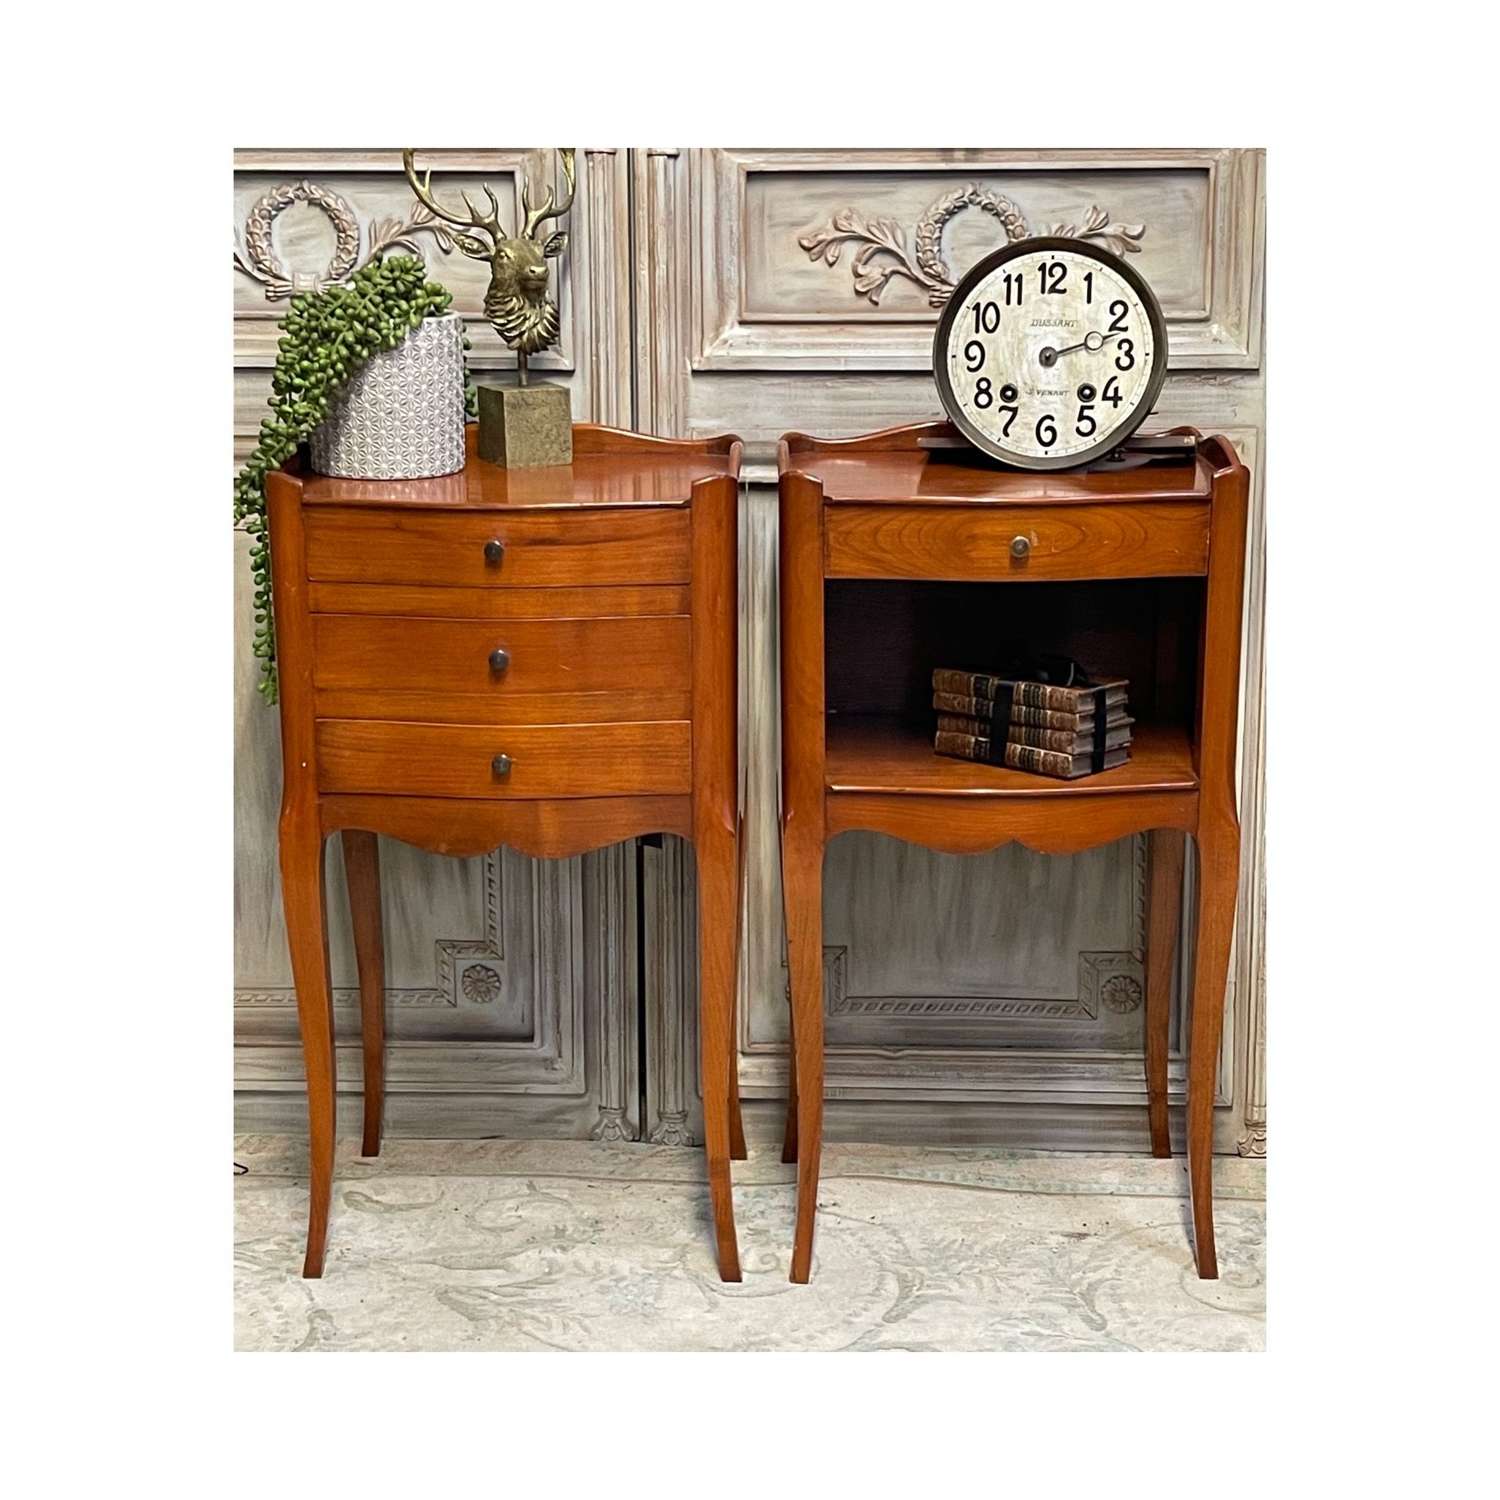 Pair of French ‘his and hers’ bedside tables